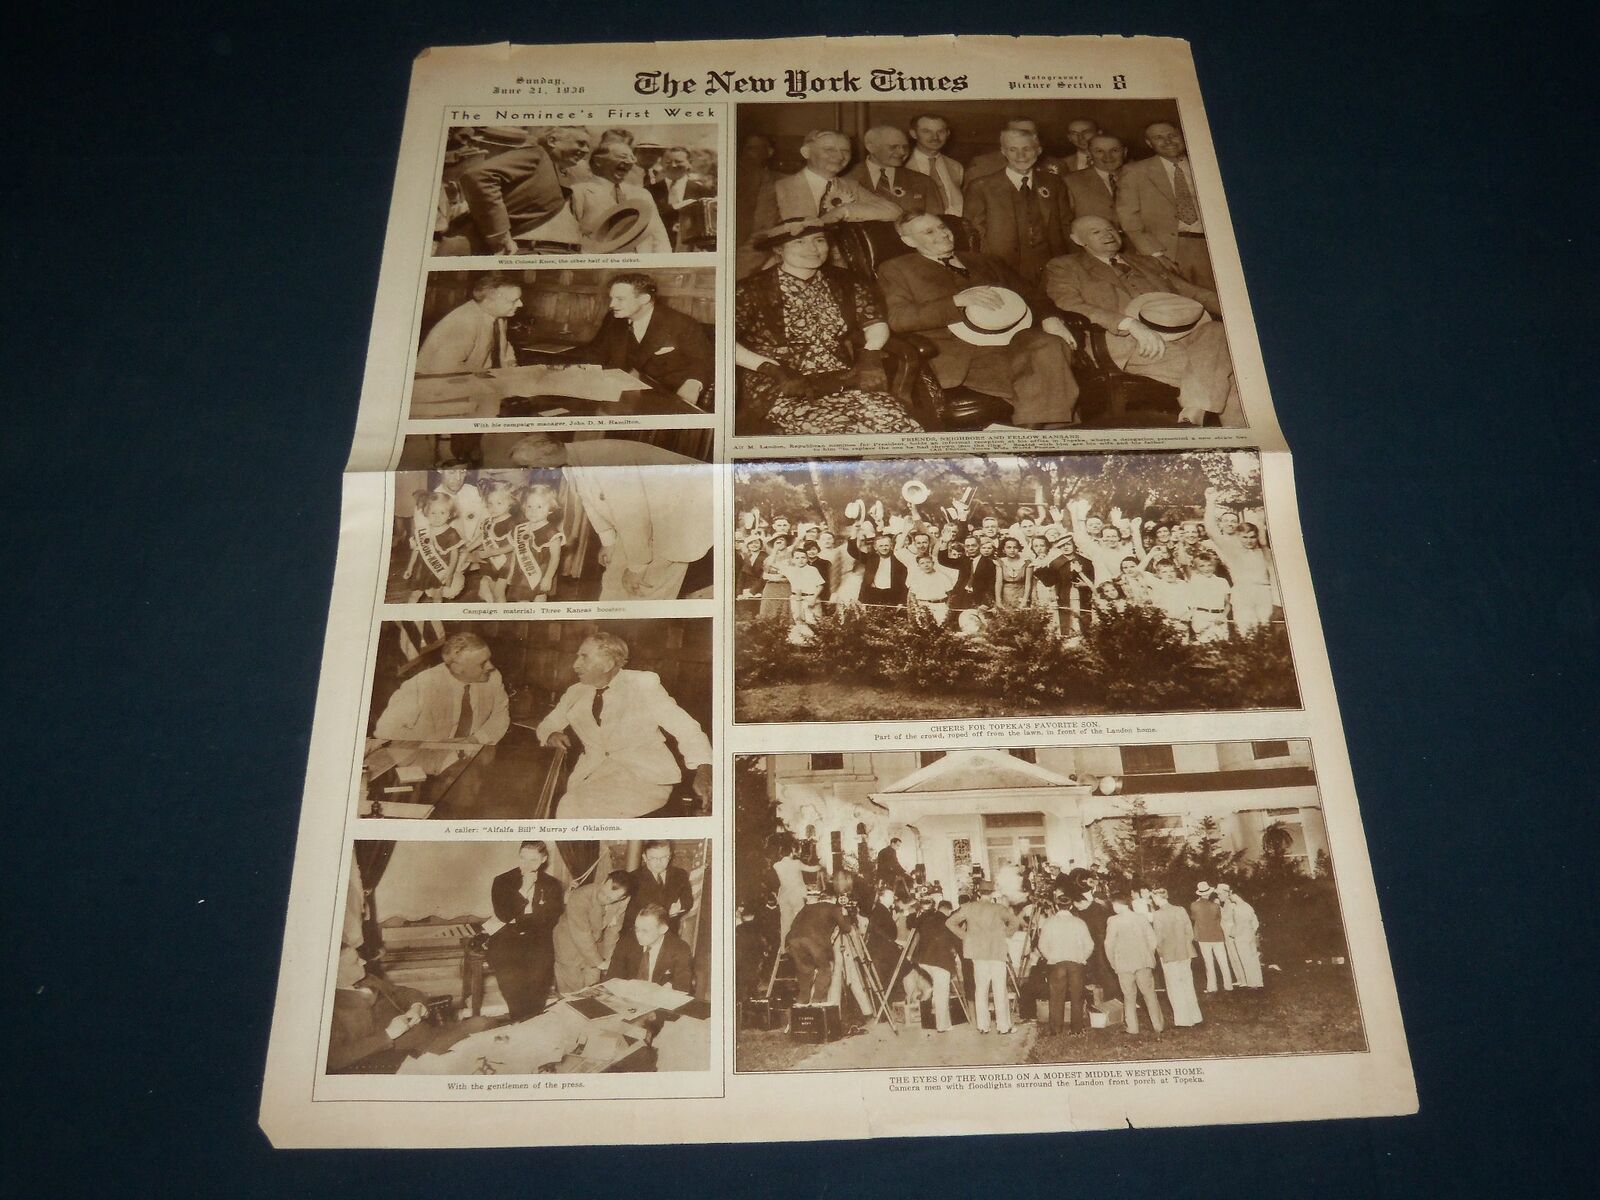 1936 JUNE 21 NEW YORK TIMES ROTO PICTURE SECTION - ALFA LANDON - NT 9381